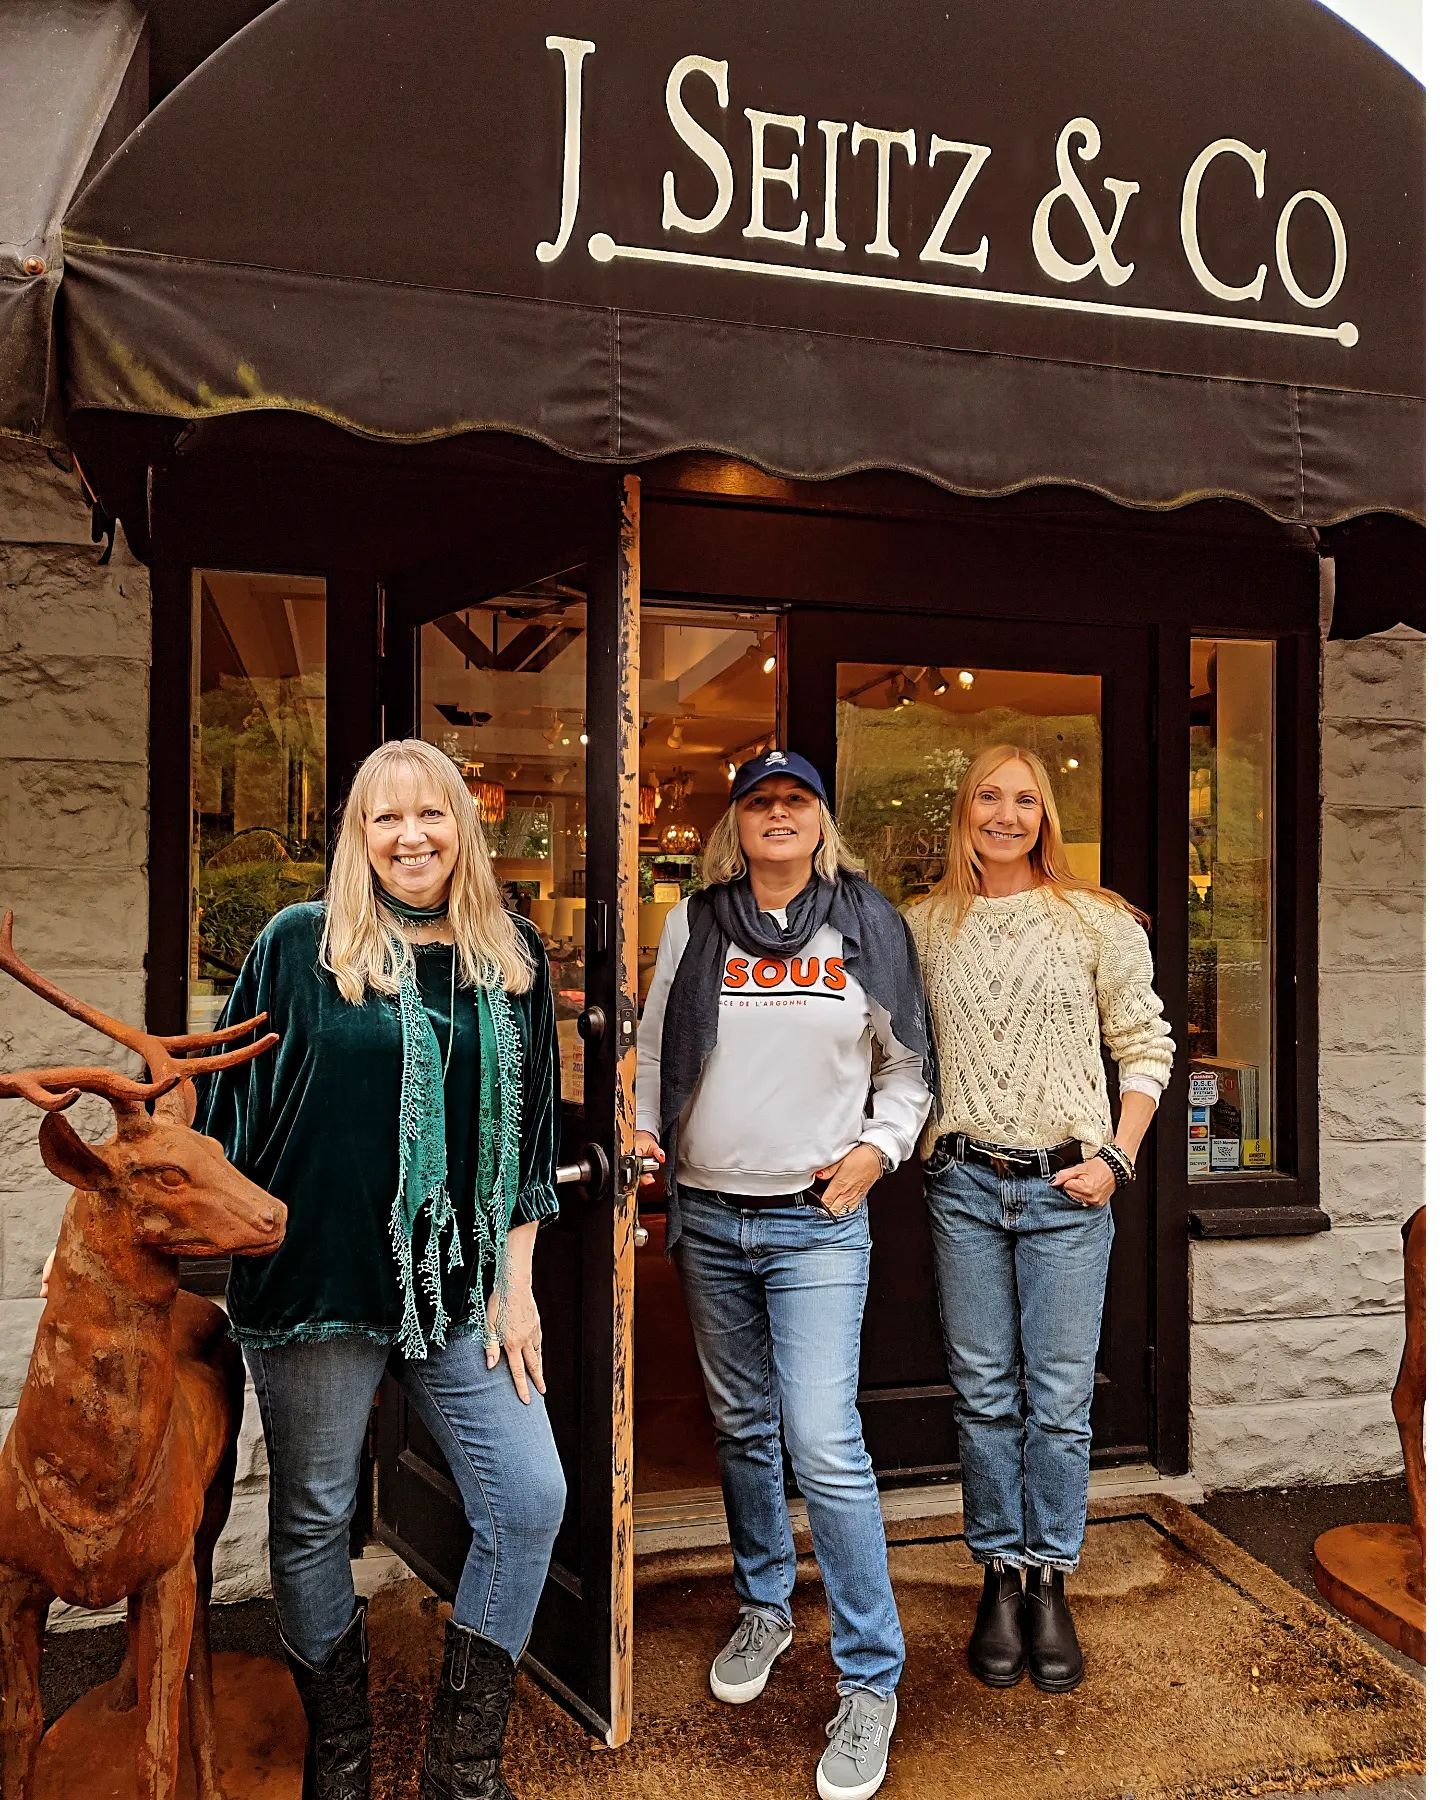 Three out of eight of our awesome J. SEITZ moms!  Come in and let them help you pick something for Mother's Day!  Jennifer, Francesca and Lisa will know the perfect gift and will gift wrap too.  #mothersday #blonds #jeans #moms #gifts
#38years #newpr